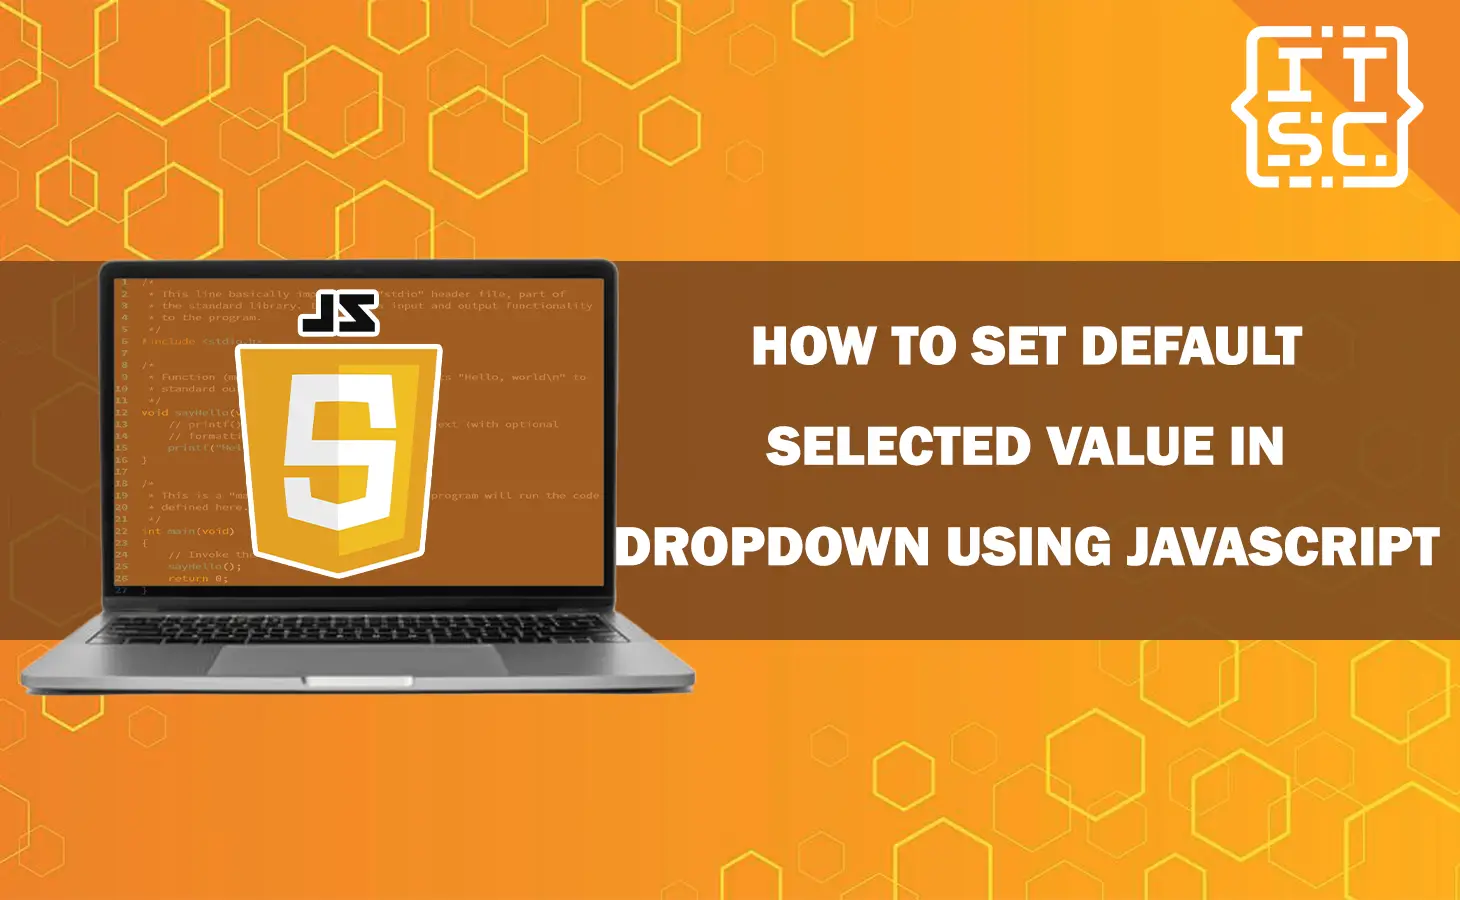 How to Set Default Selected Value in Dropdown Using JavaScript